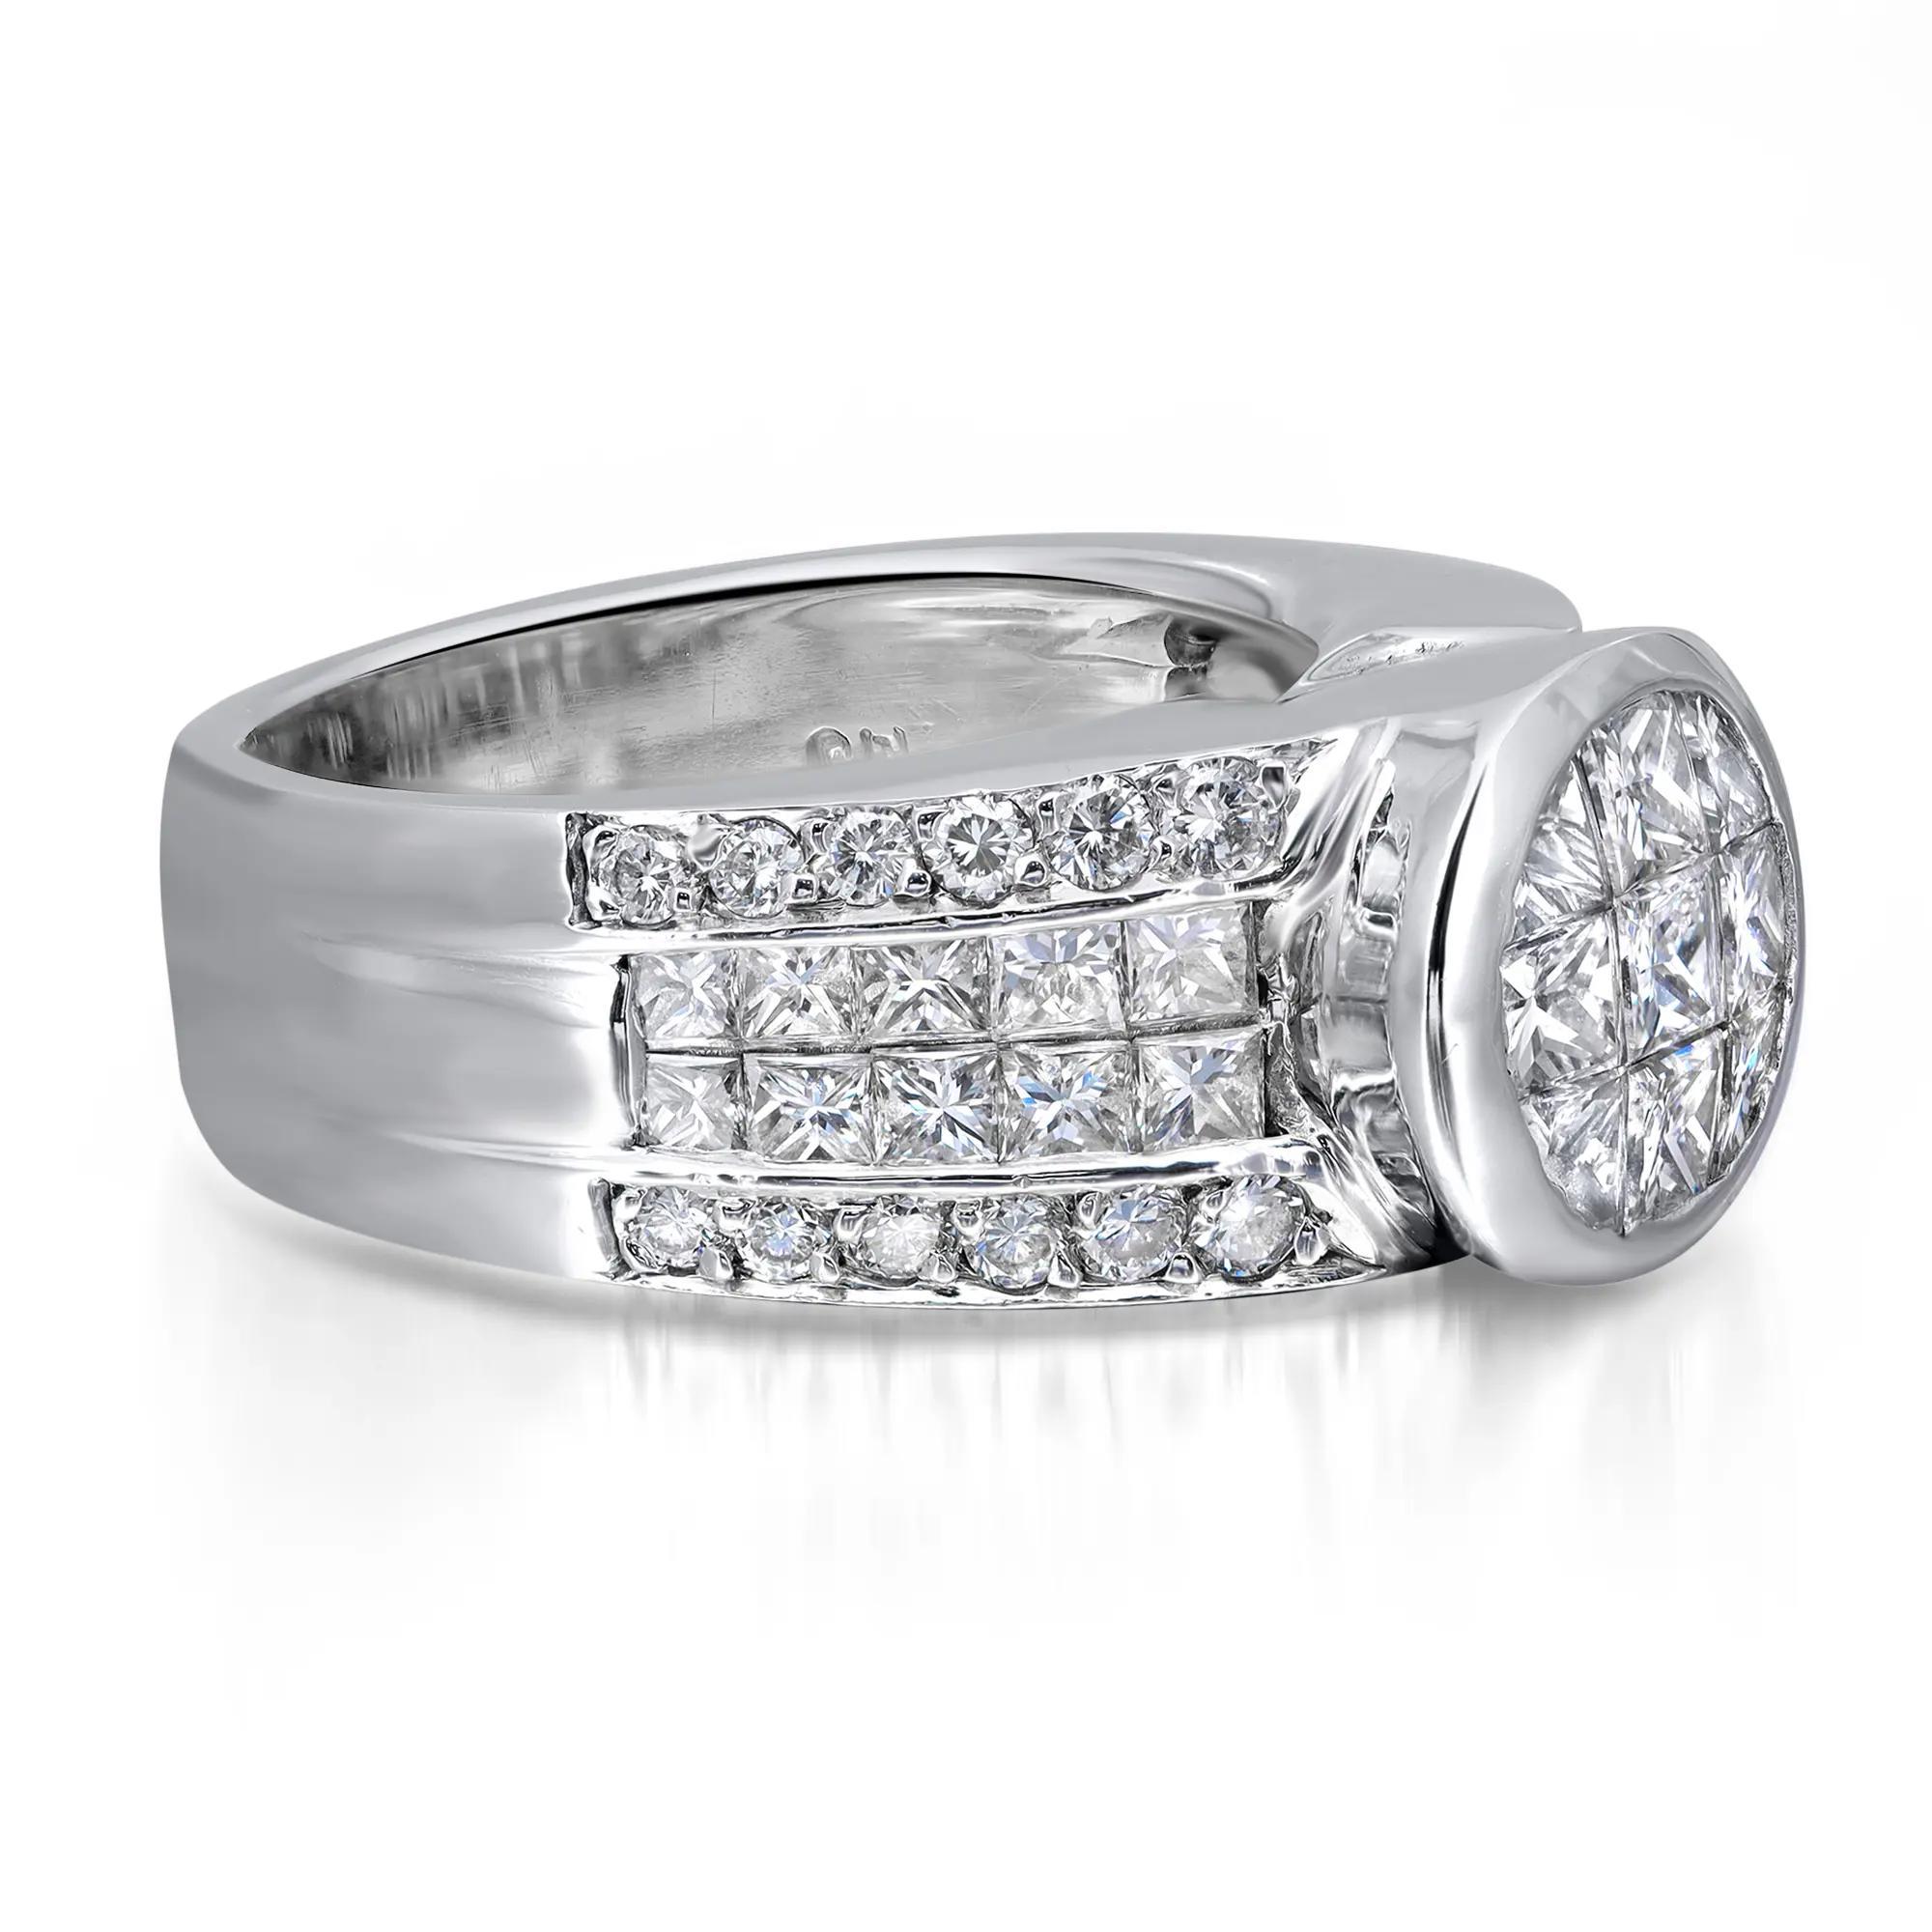 Bold and Beautiful. This one of a kind enchanting band ring features a round bezel center with channel set sparkling princess cut diamonds accented with princess cut and pave set round cut diamonds halfway along the band. Total diamond weight: 2.00